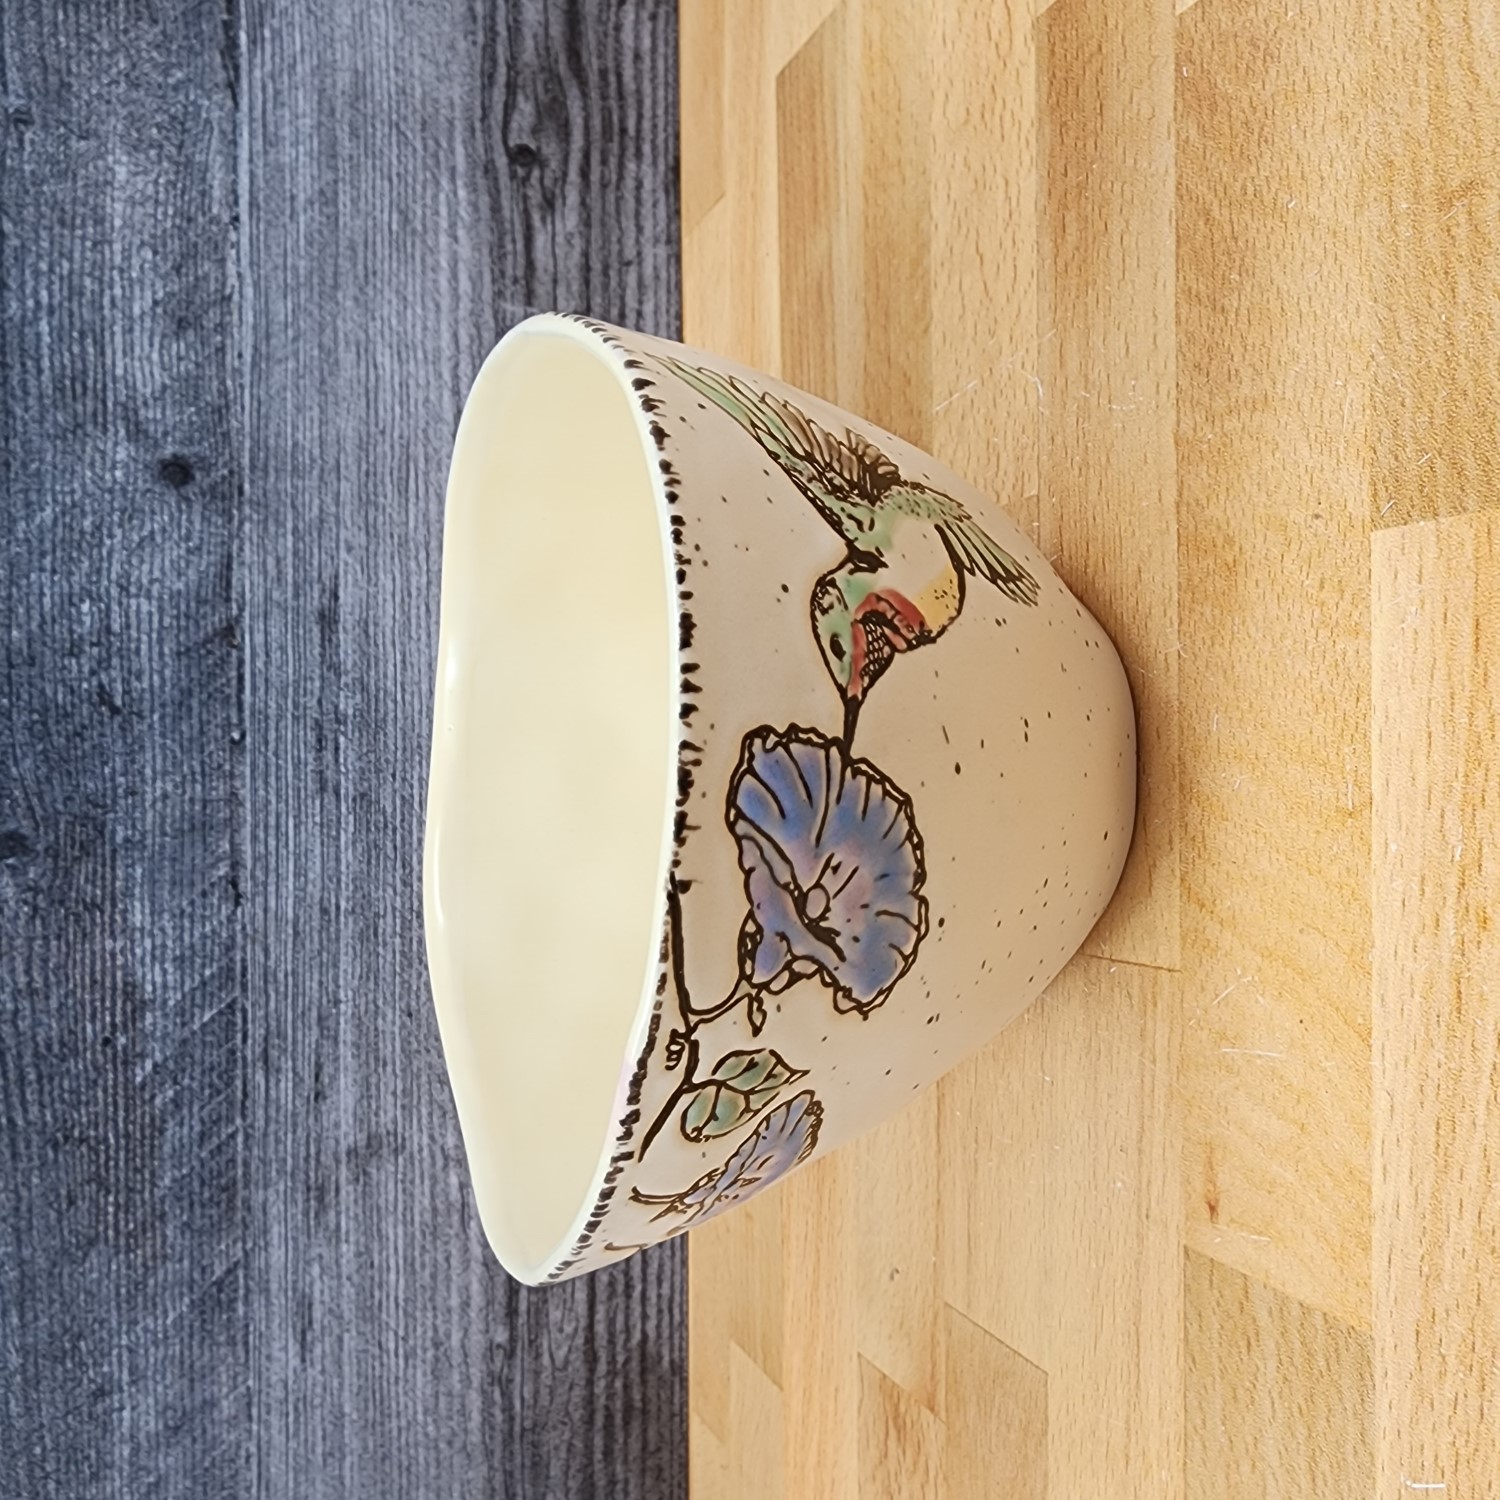 This Hummingbird Floral Bowl 6 inch (15cm) Dish by Blue Sky is made with love by Premier Homegoods! Shop more unique gift ideas today with Spots Initiatives, the best way to support creators.